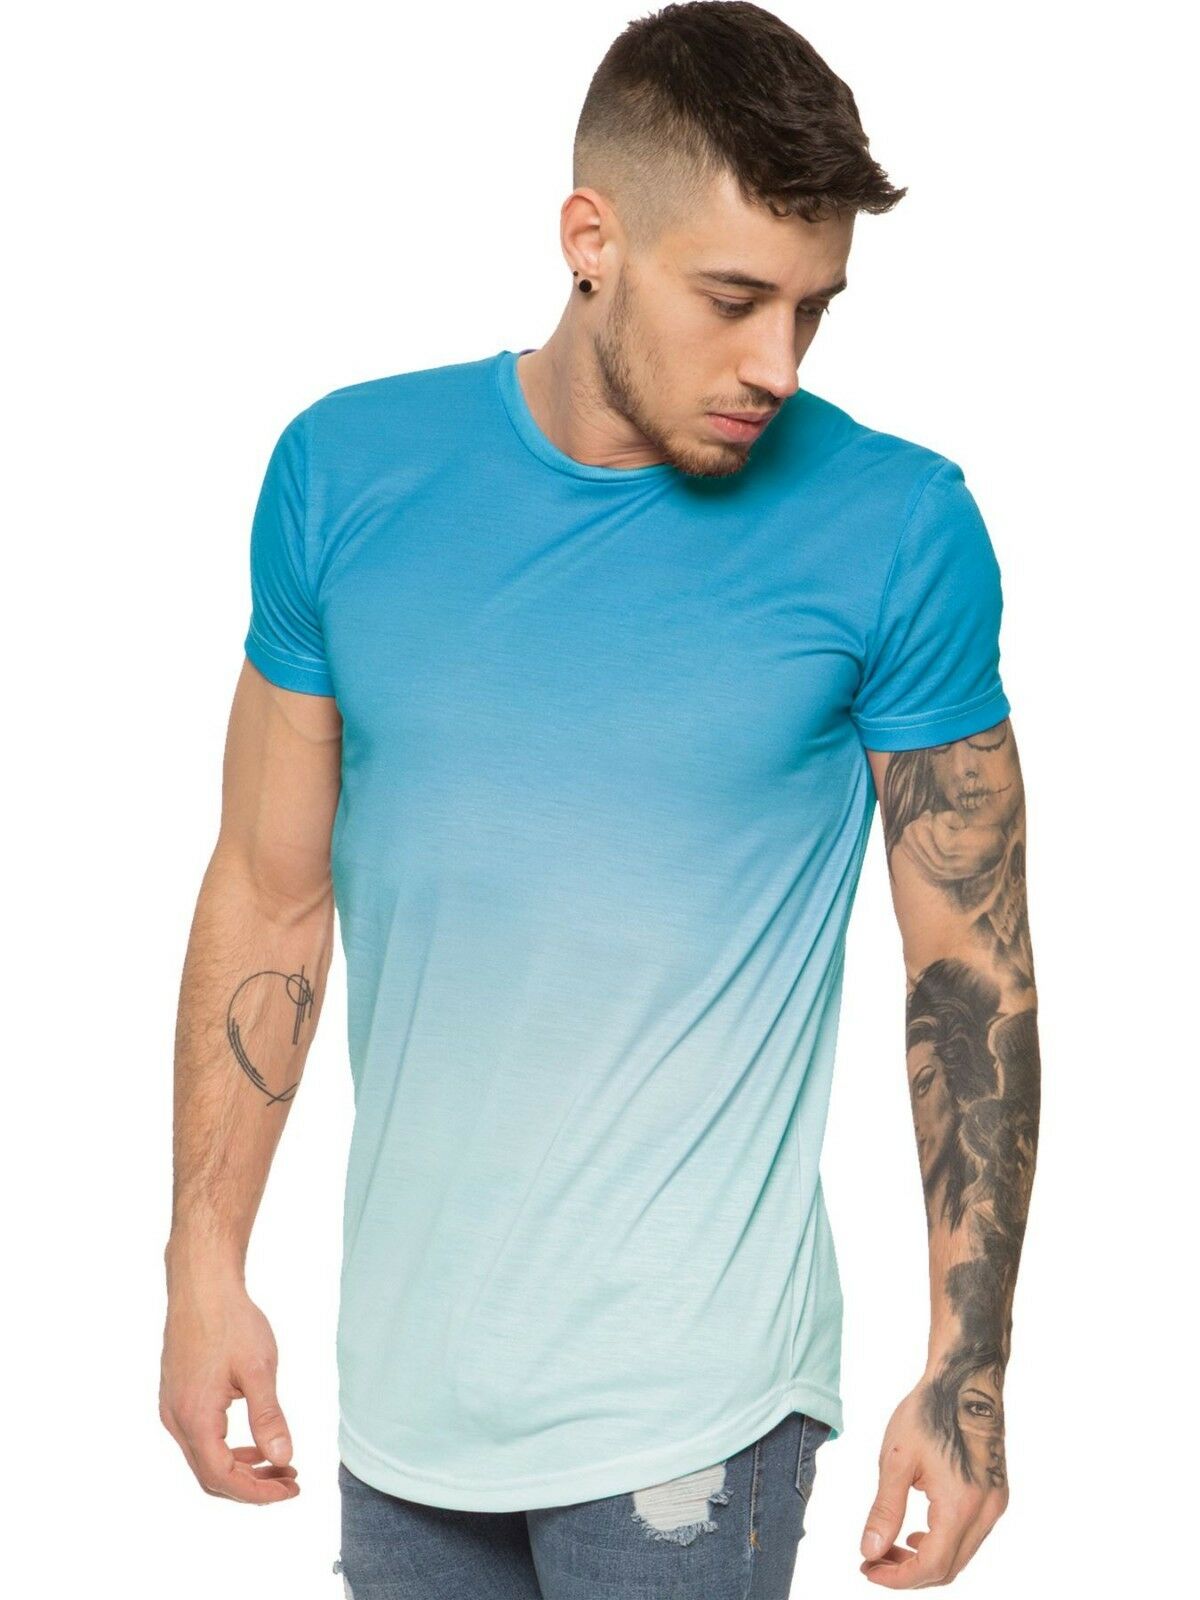 Enzo Mens Fitted T Shirt Contrast Fade 2 Tone Short Sleeve Polyester ...